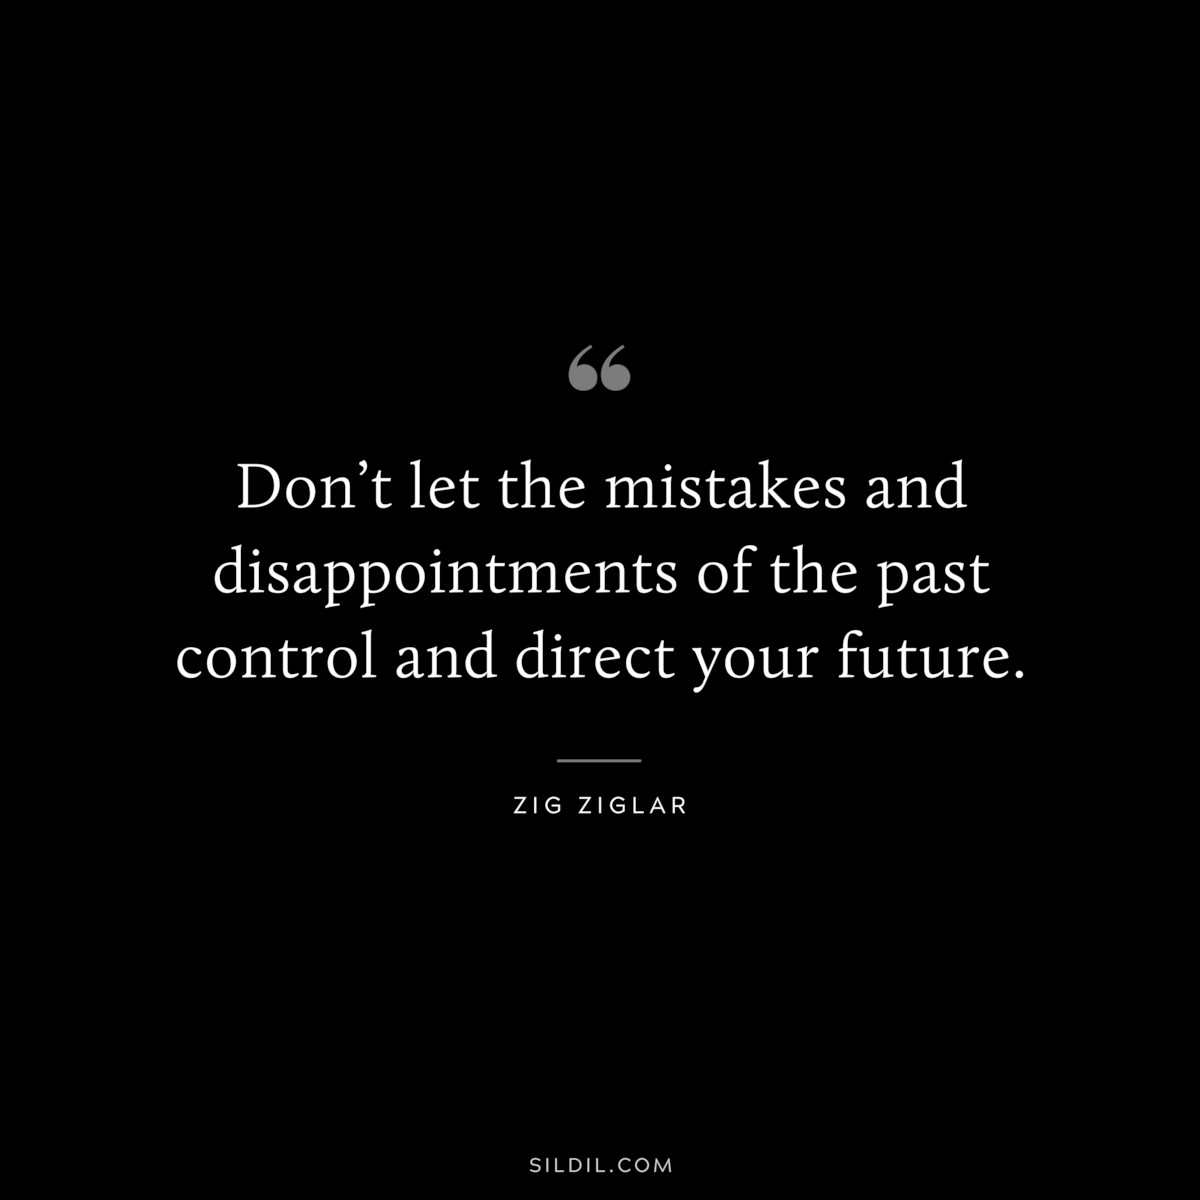 Don’t let the mistakes and disappointments of the past control and direct your future. ― Zig Ziglar